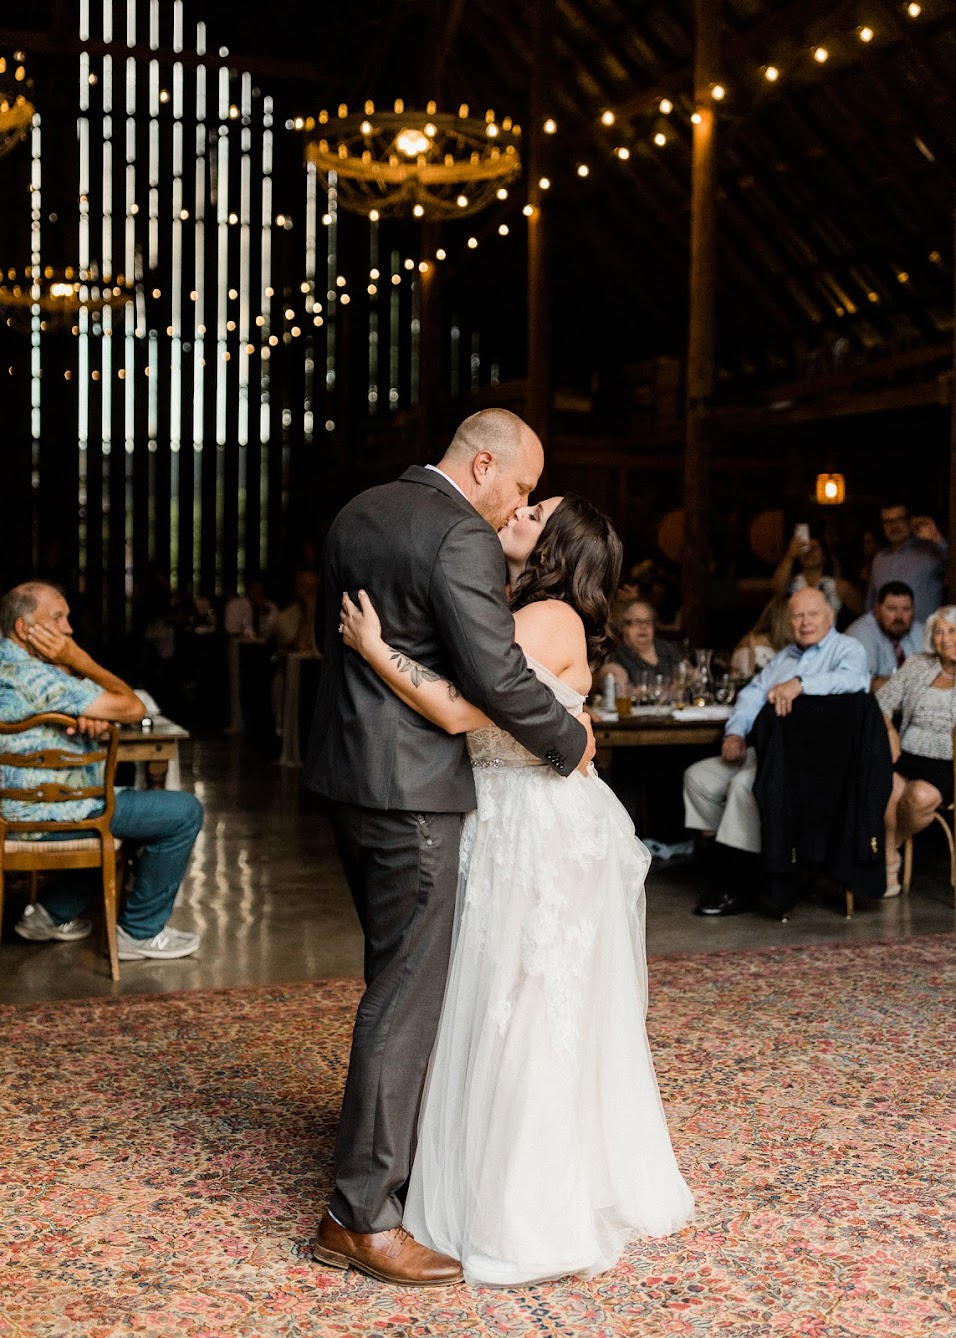 the couple standing in the middle of the dance floor kissing while their guests are sitting.